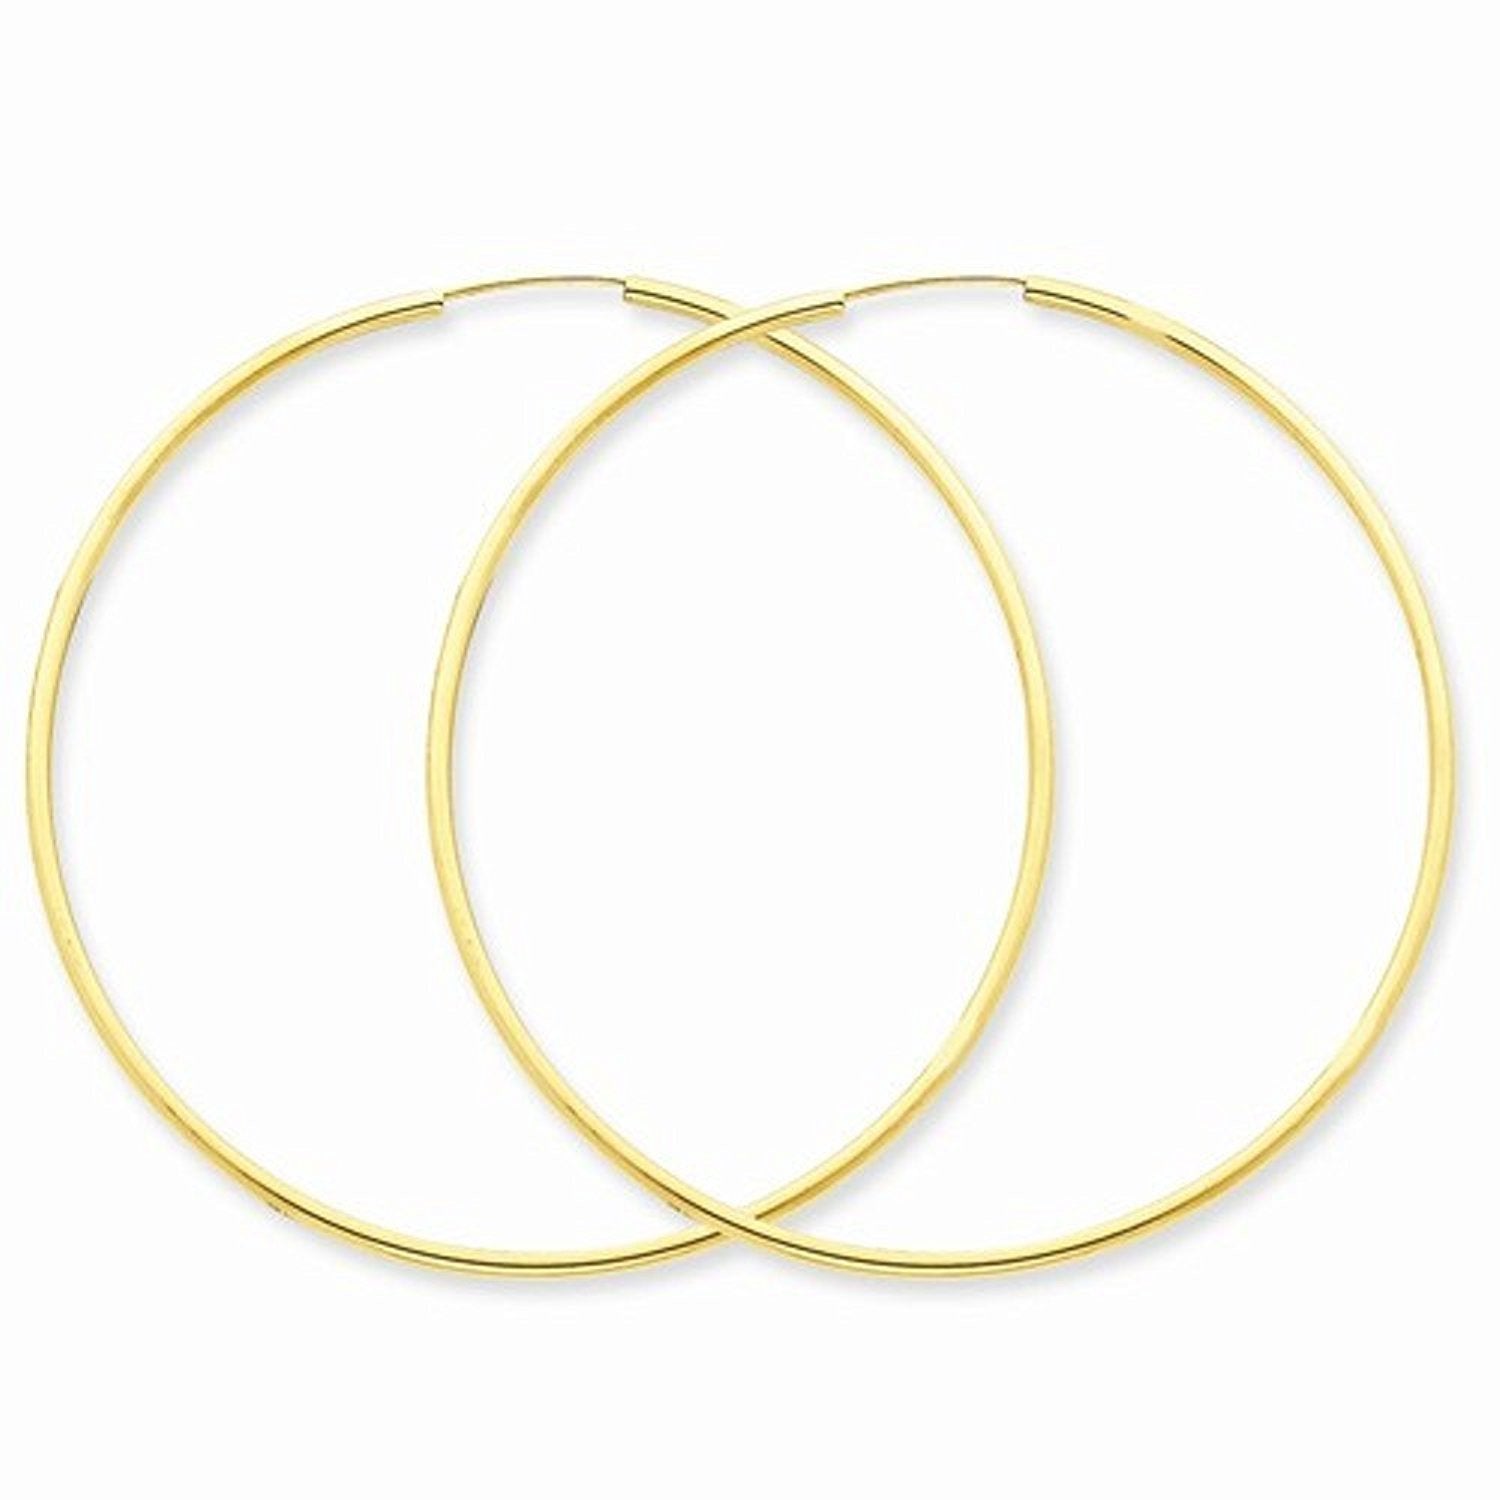 14K Yellow Gold 51mm x 1.5mm Endless Round Hoop Earrings